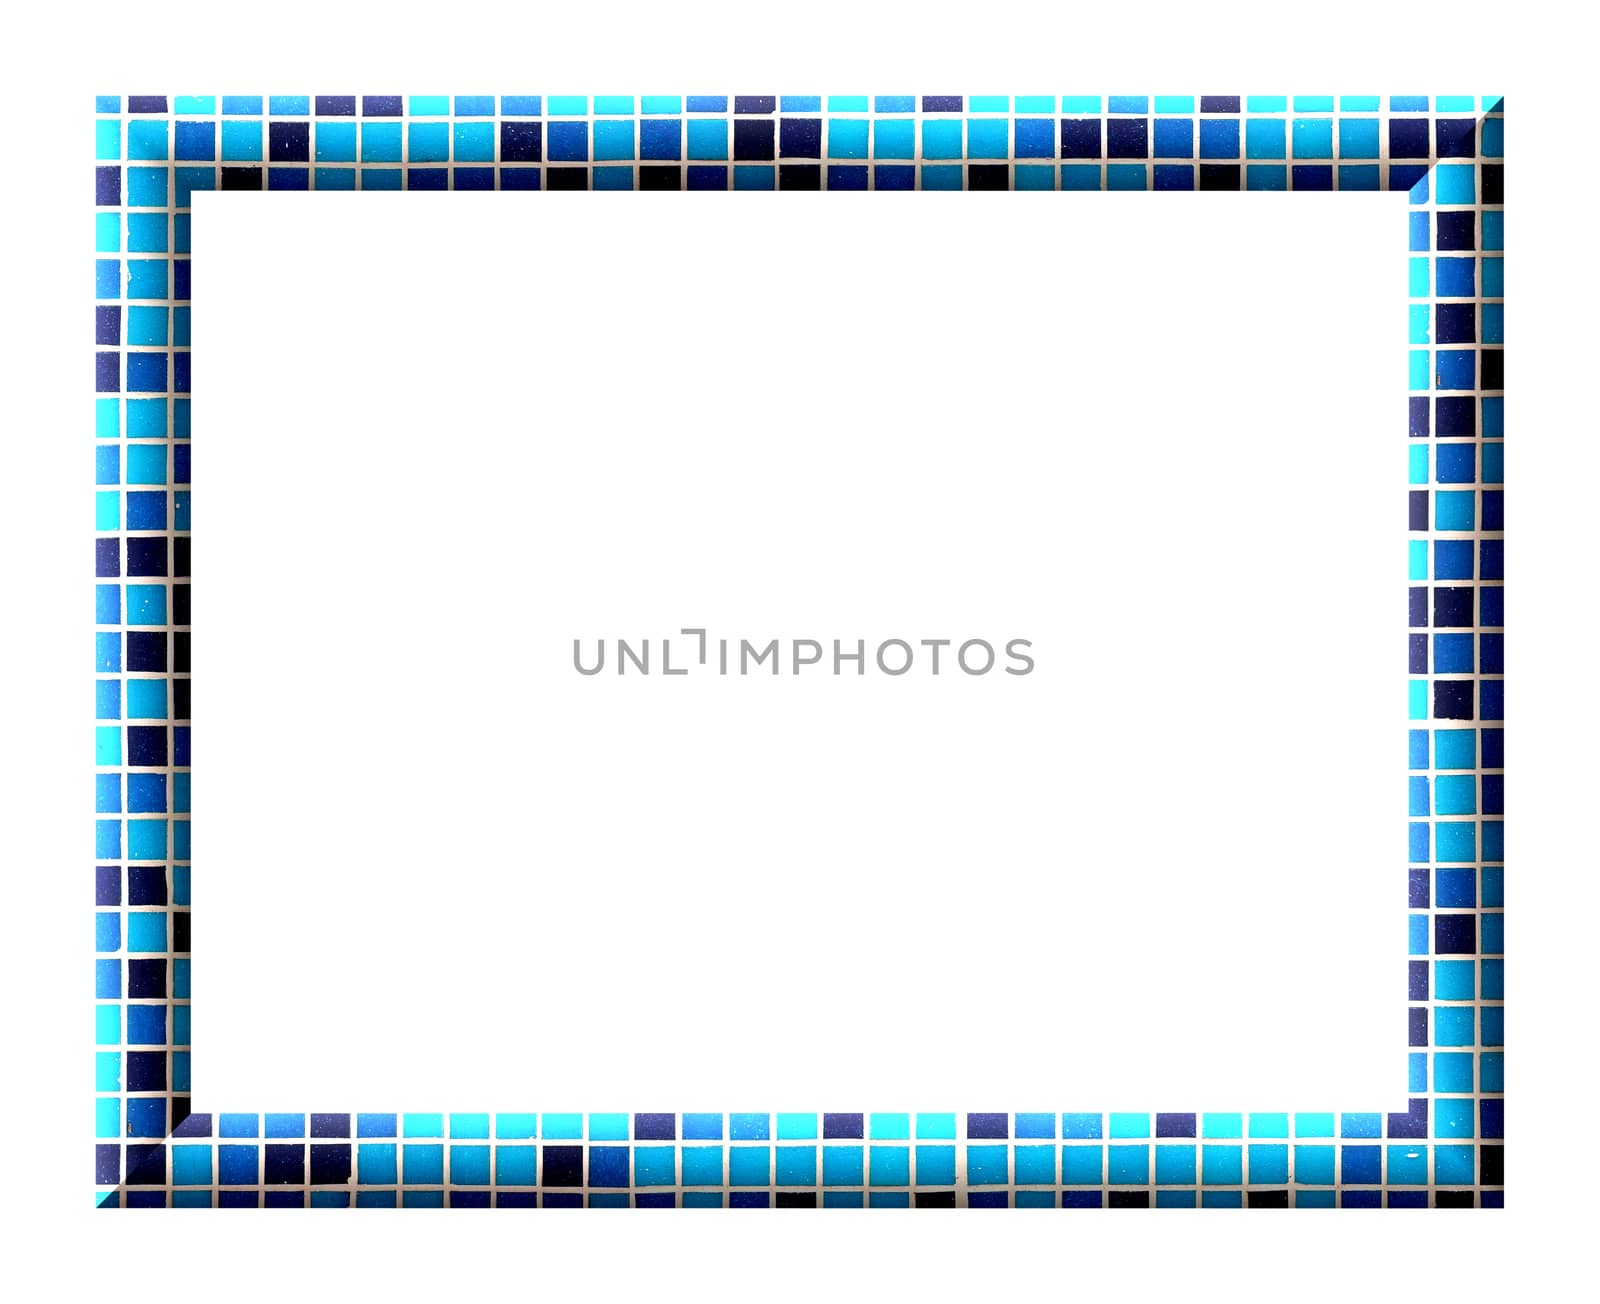 Empty convex rectangular frame with square tiles texture dark blue, light blue and turquoise